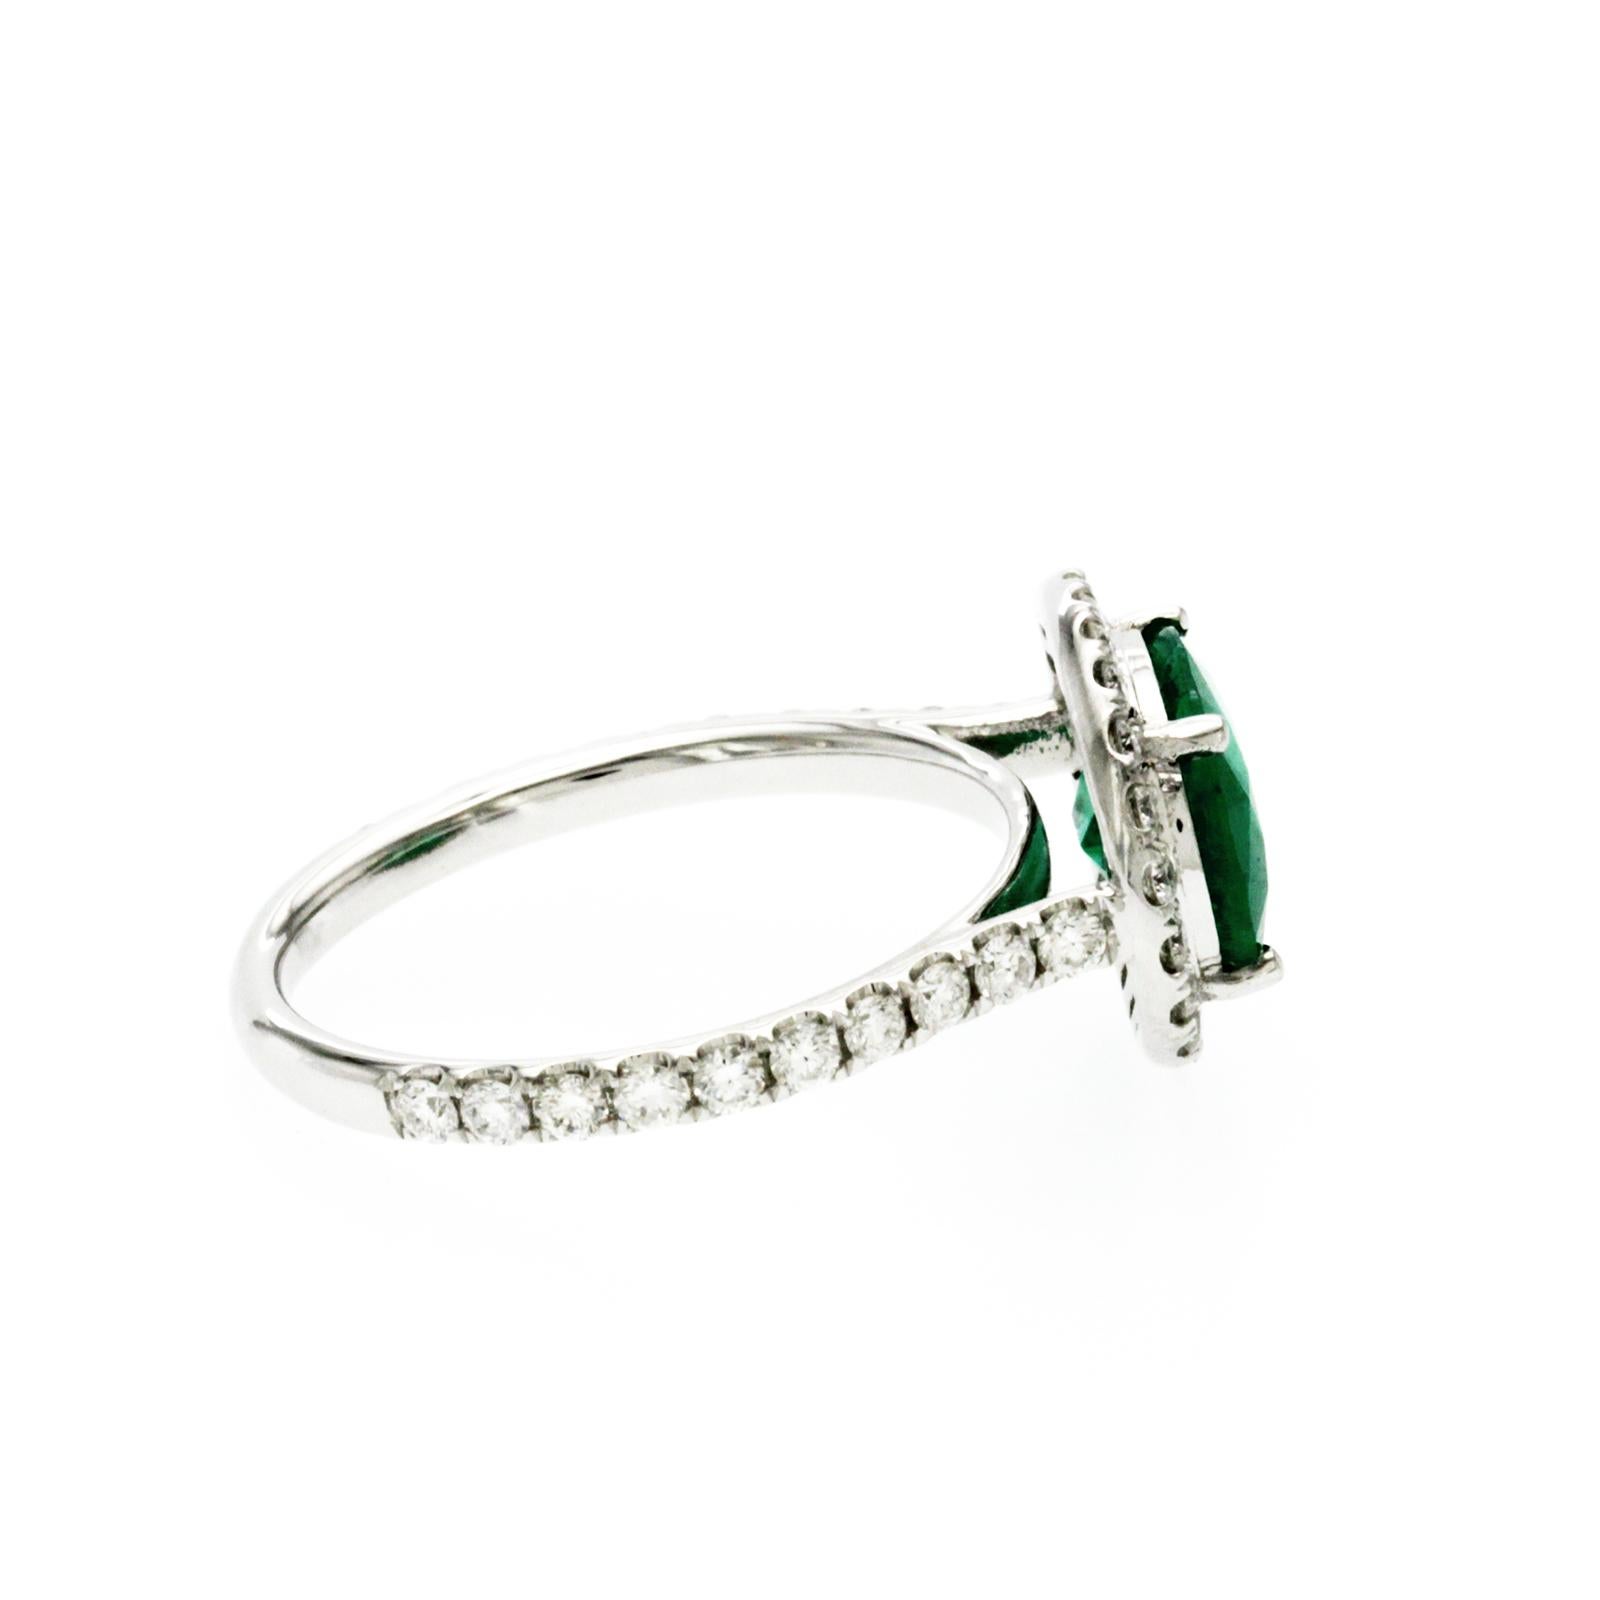 1.87 Ct Zambian Emerald & 0.65 Ct Diamonds in 14K White Gold Engagement Ring For Sale 1